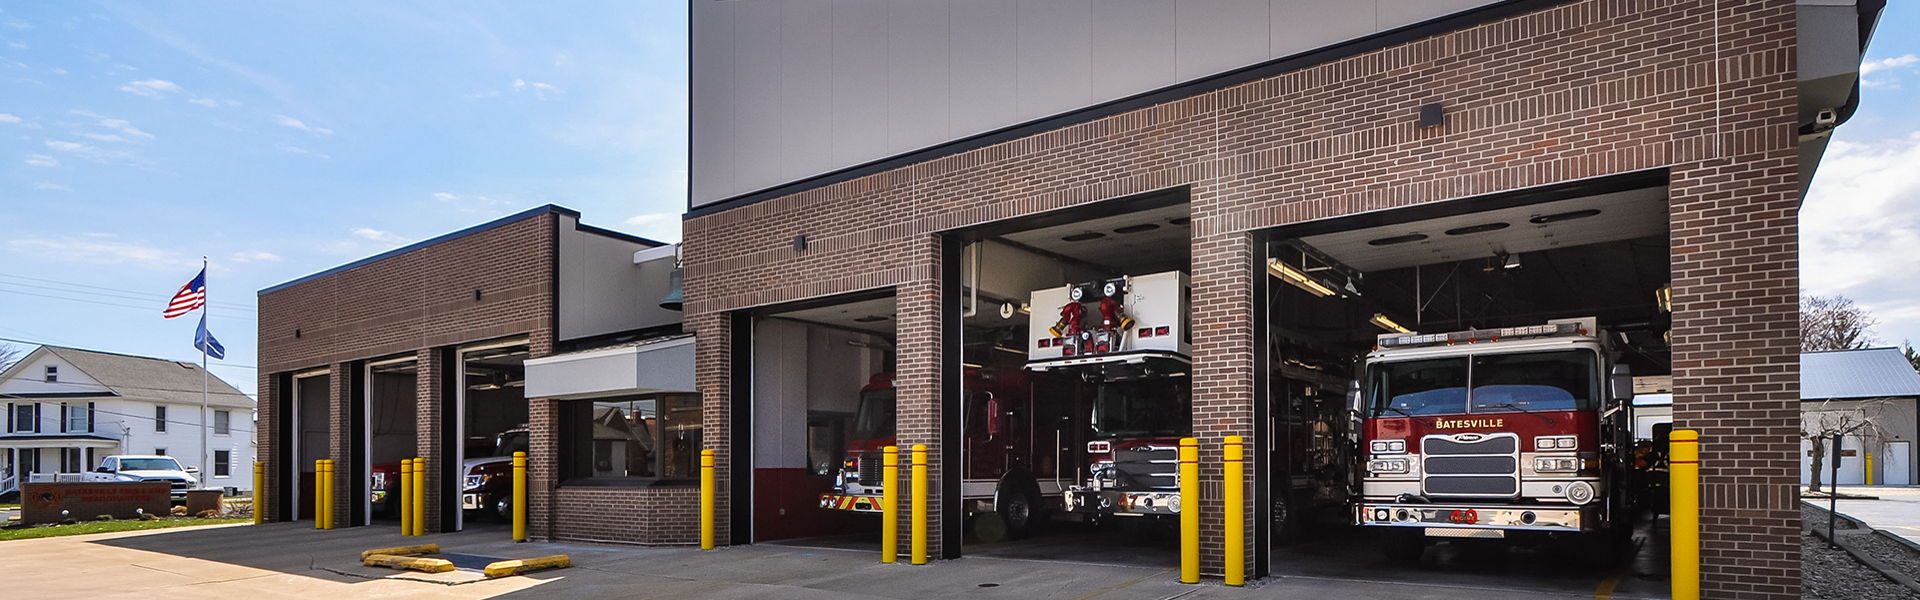 Image for Batesville Fire Station